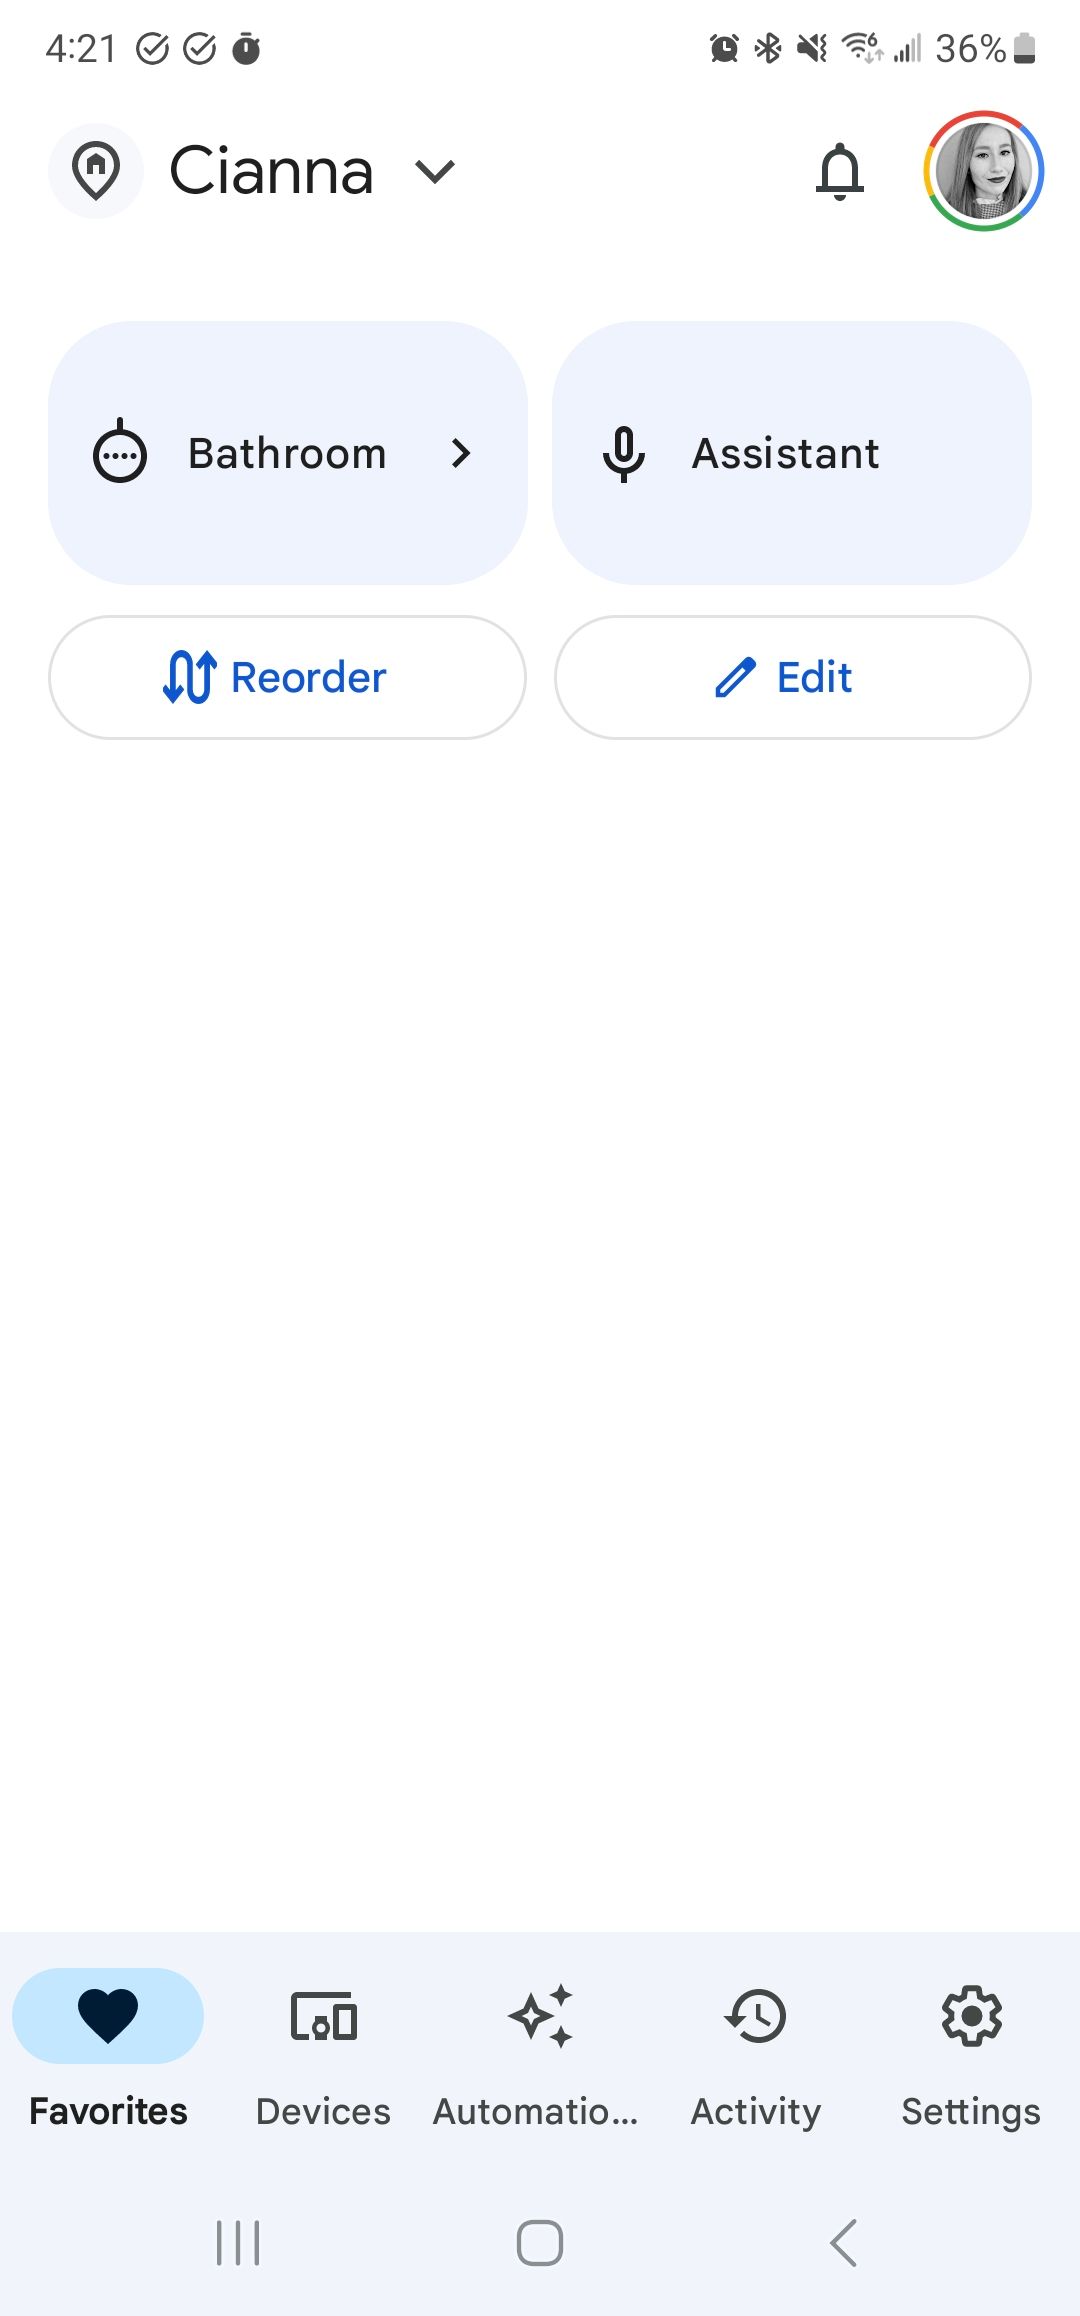 A screenshot of the Google Home app's home page.